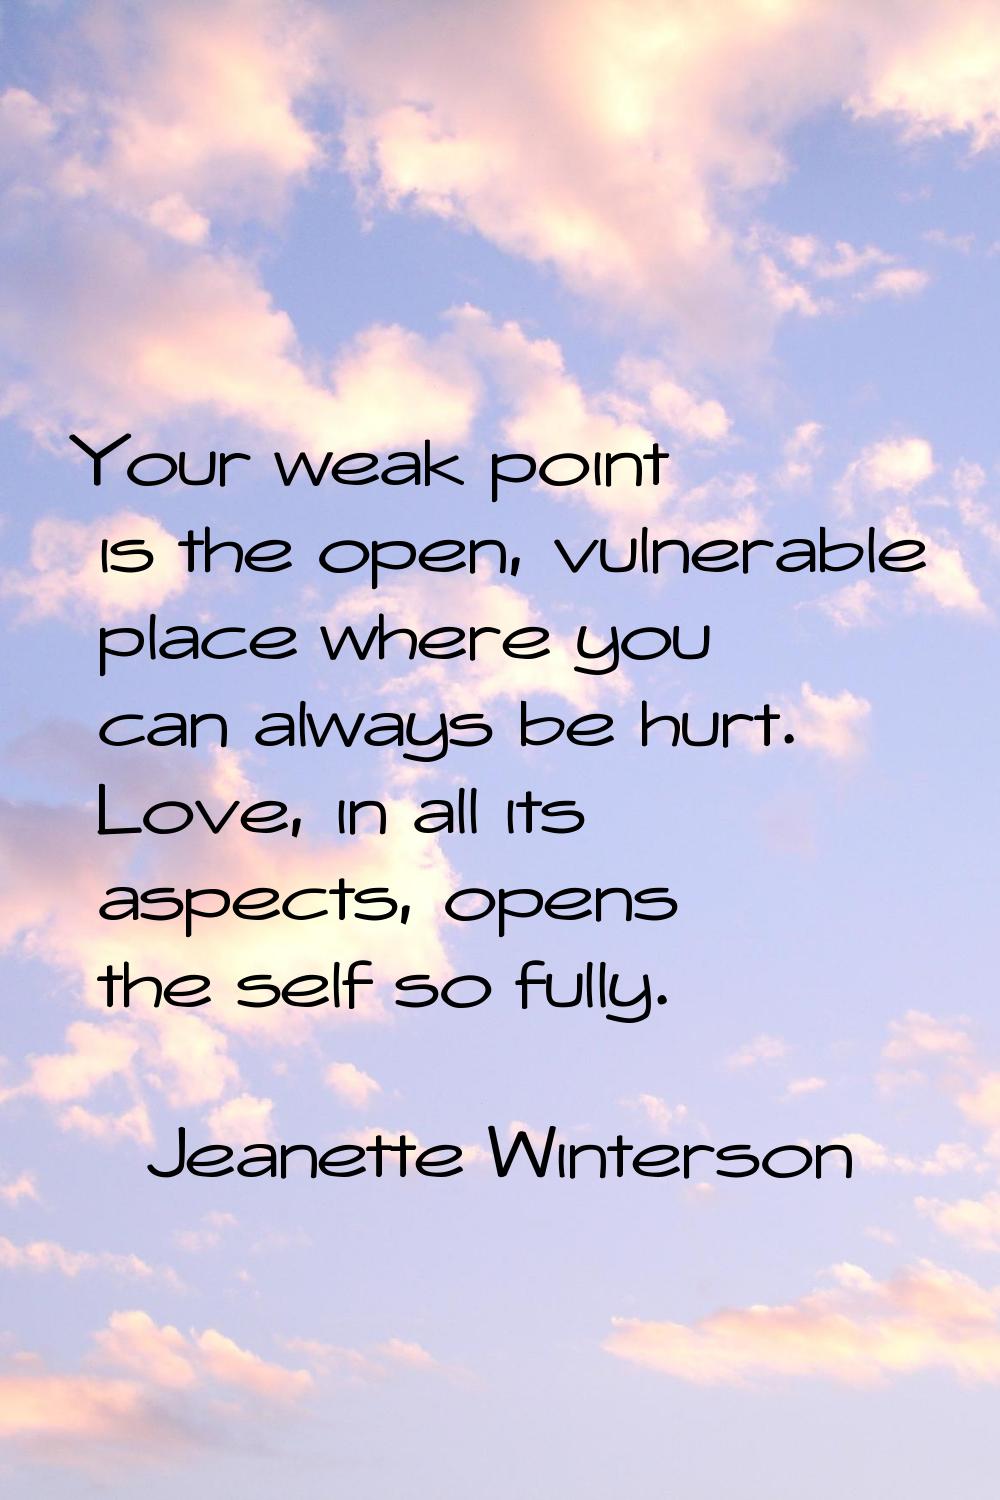 Your weak point is the open, vulnerable place where you can always be hurt. Love, in all its aspect